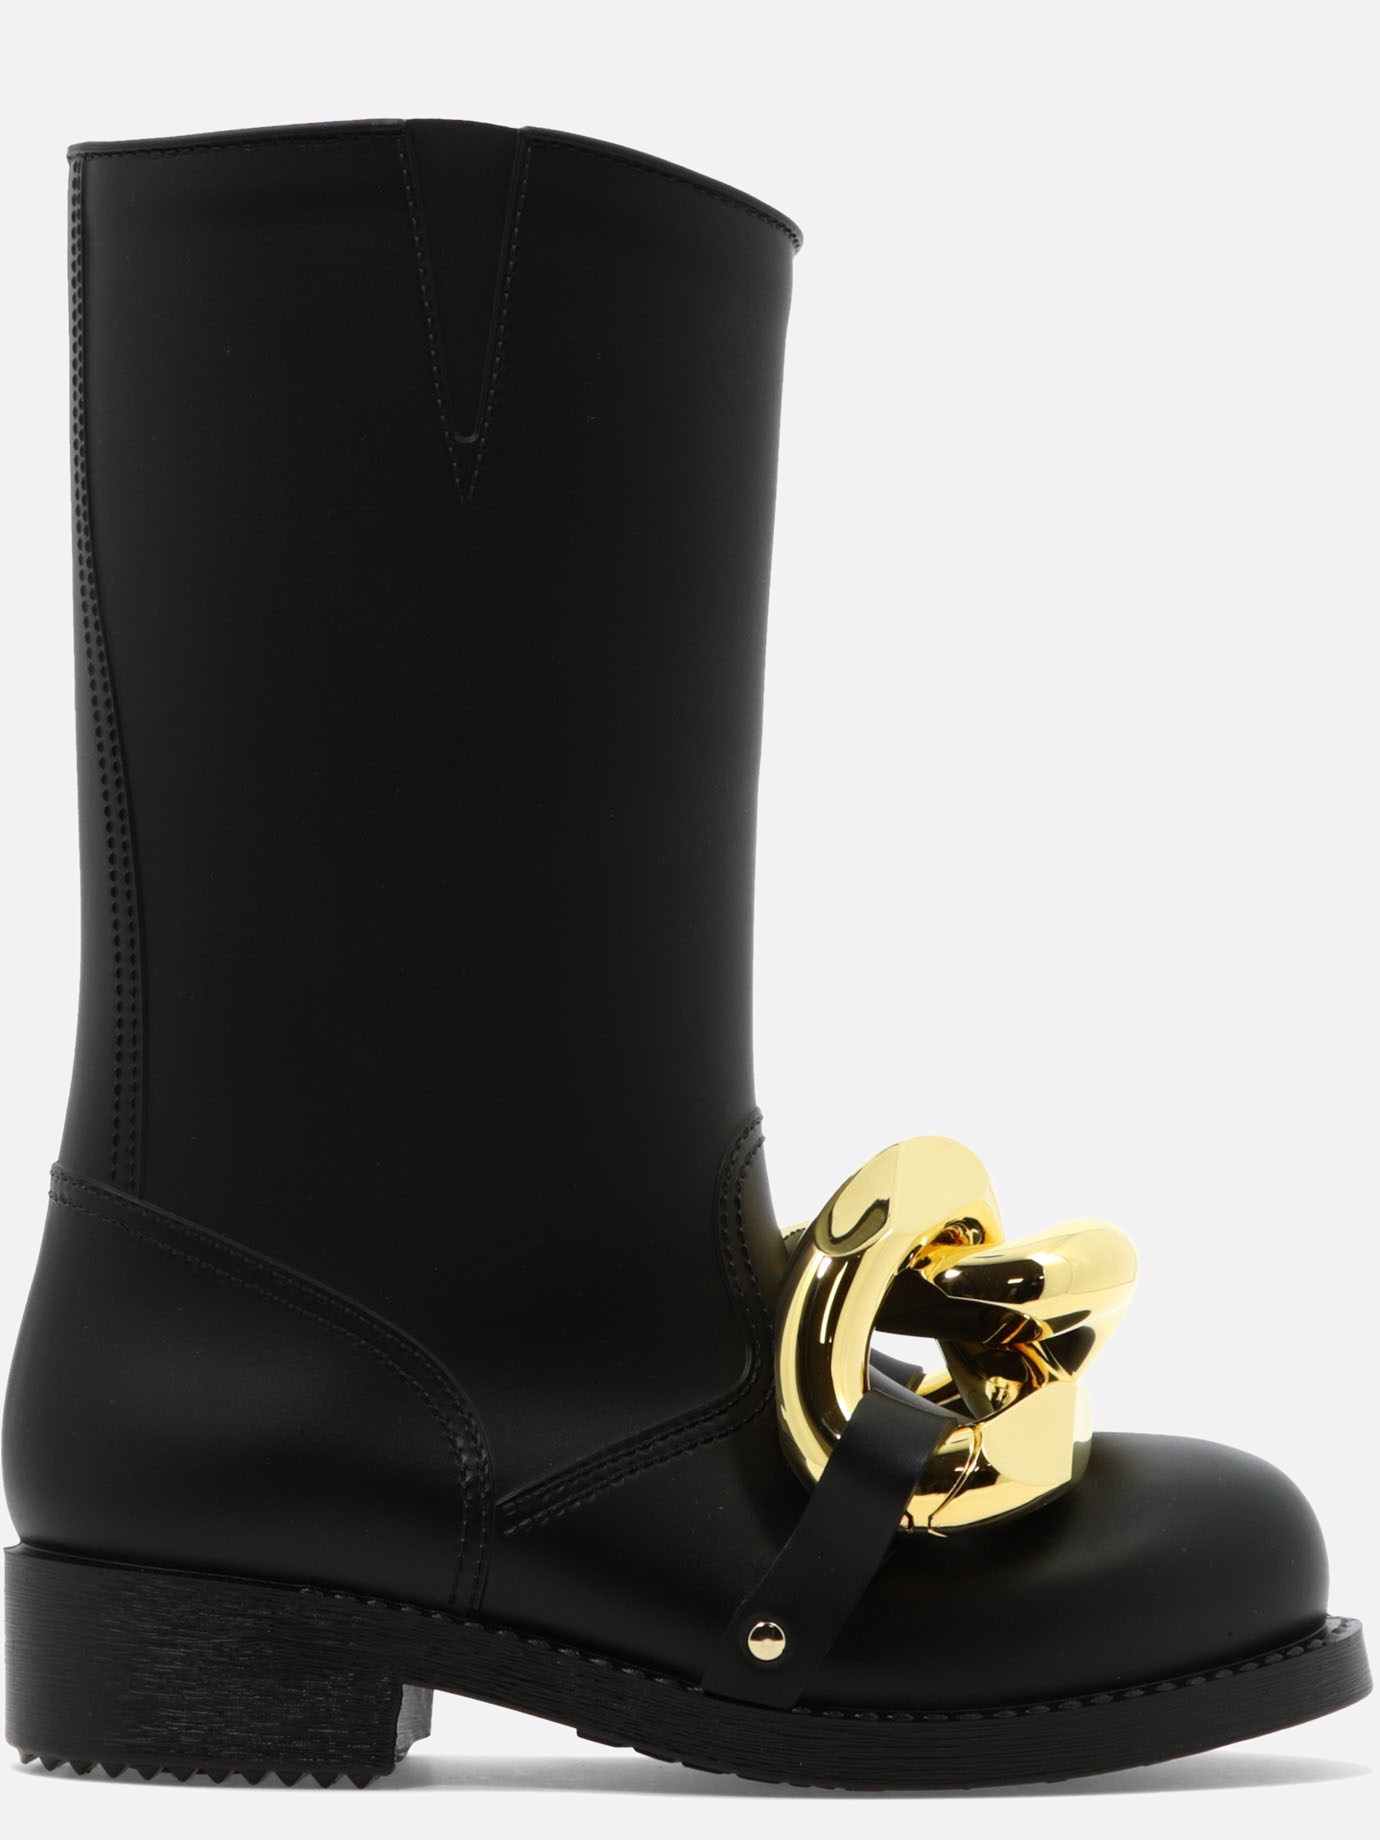  Chain  bootsby JW Anderson - 2